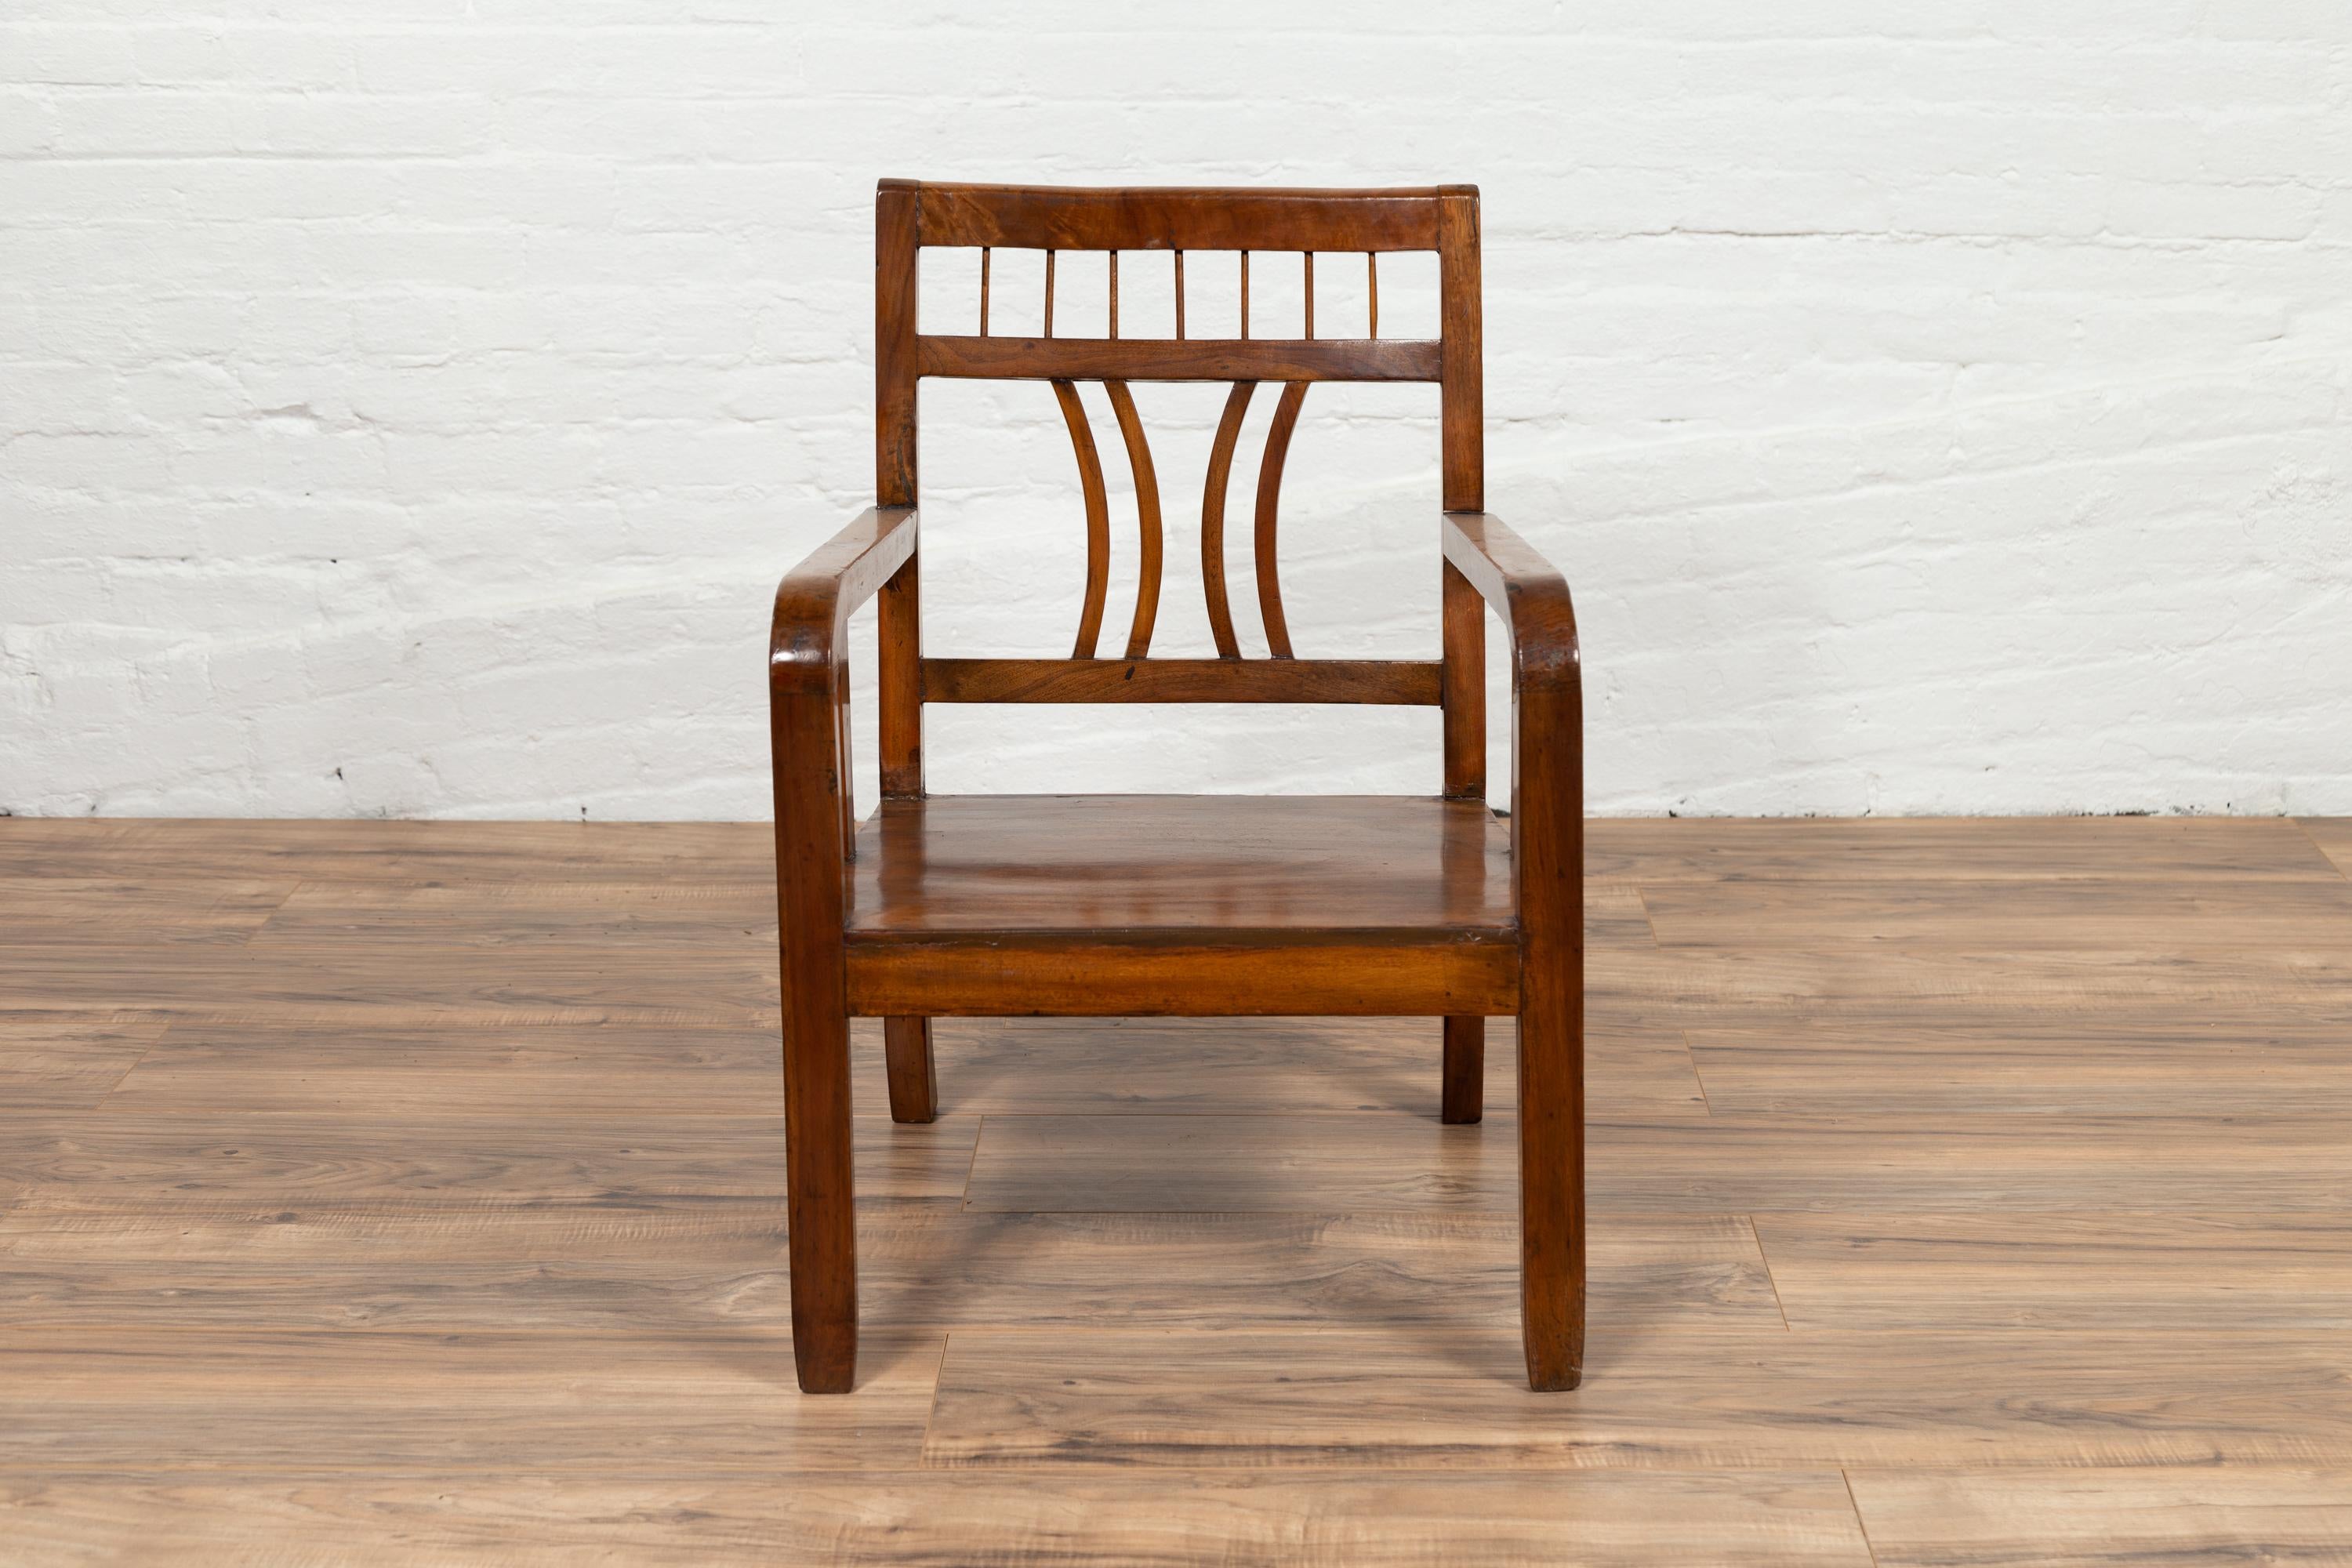 A Chinese vintage Art Deco style elmwood armchair from the mid-20th century, with pierced back and brown patina. Experience the elegant fusion of Art Deco design and traditional elmwood craftsmanship with this vintage armchair from the mid-20th